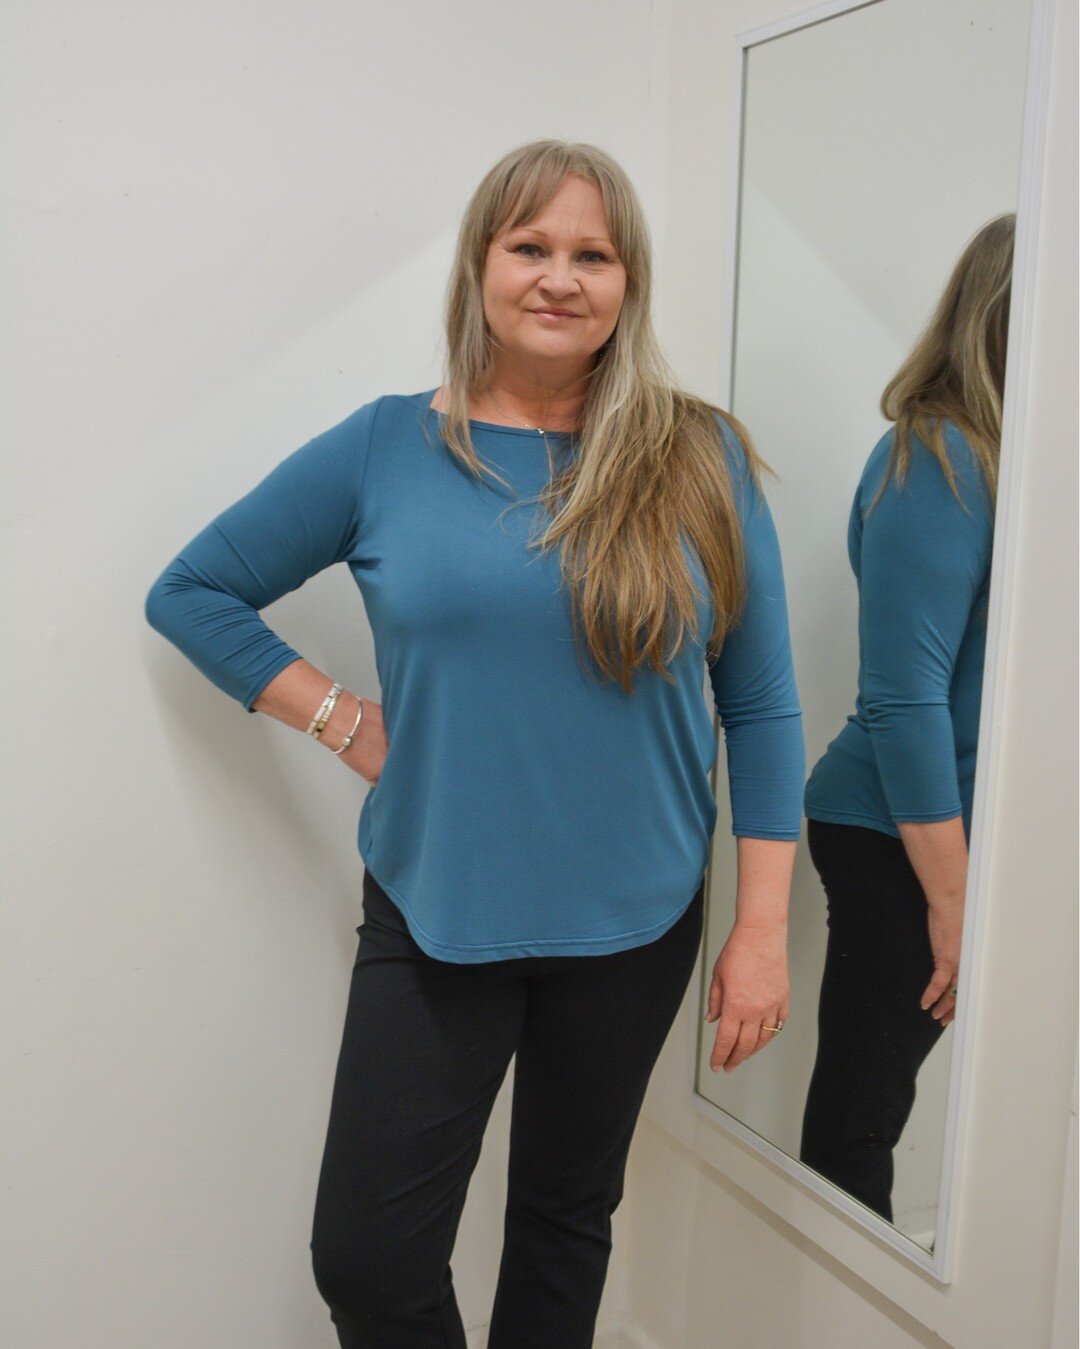 We are loving this colour so much! Claire is wearing our Serena Top in River Deluxe Bamboo!

Order yours online now

#smallaussiebusiness #shopsmall #shopethically